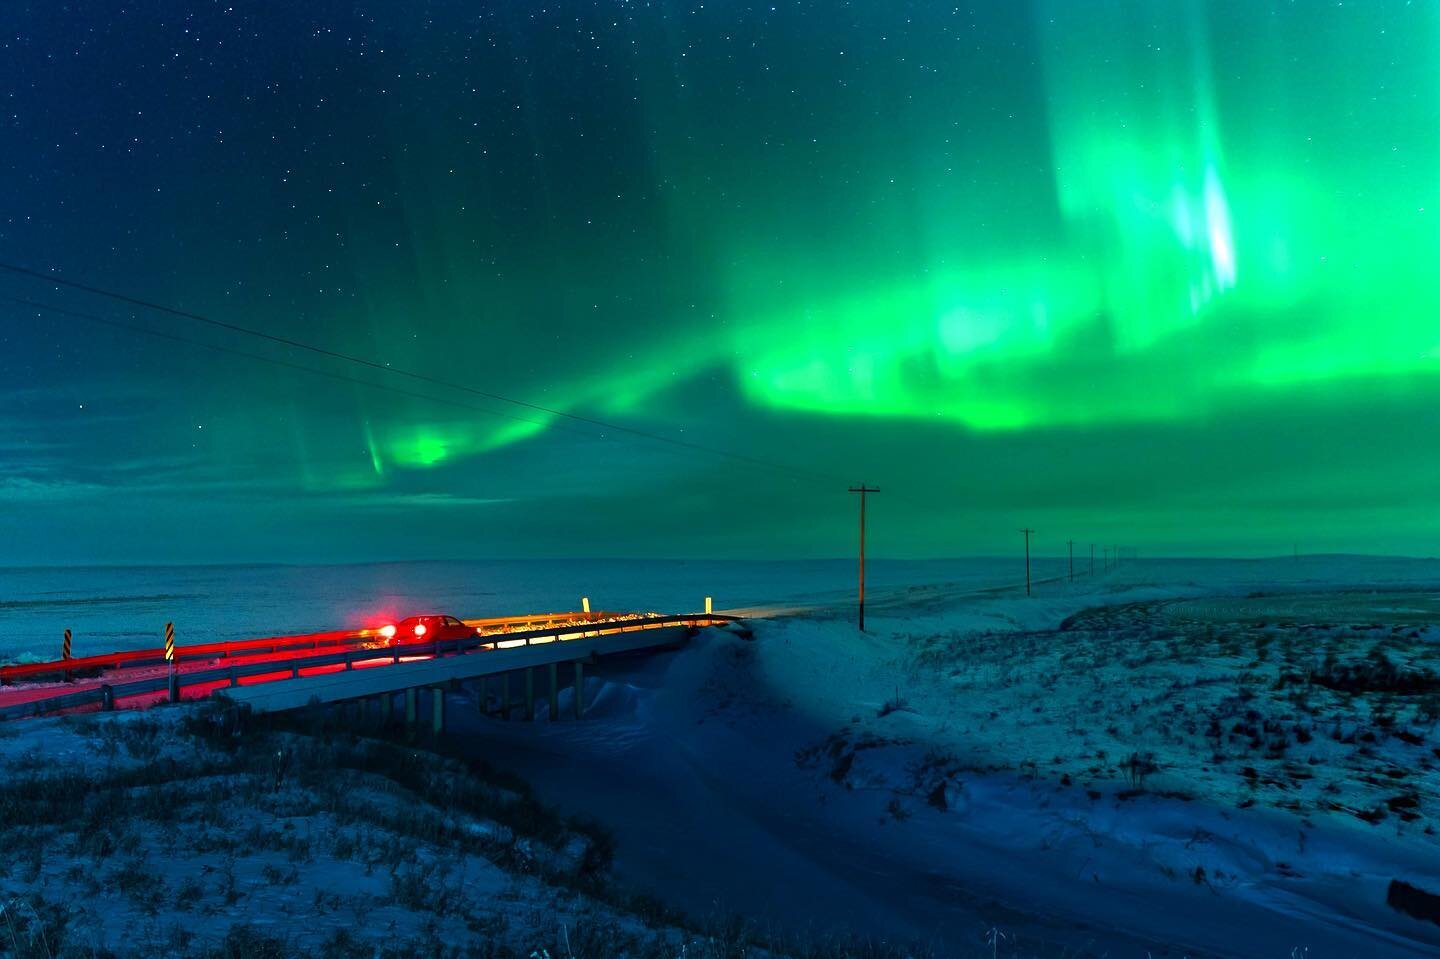 Back in January I experienced one of the spookiest Aurora events I&rsquo;ve ever witnessed&hellip;

On my drive out and away from city lights I had come across a thick blanket of fog which was hugging the prairie river valley. It gave little hope tha